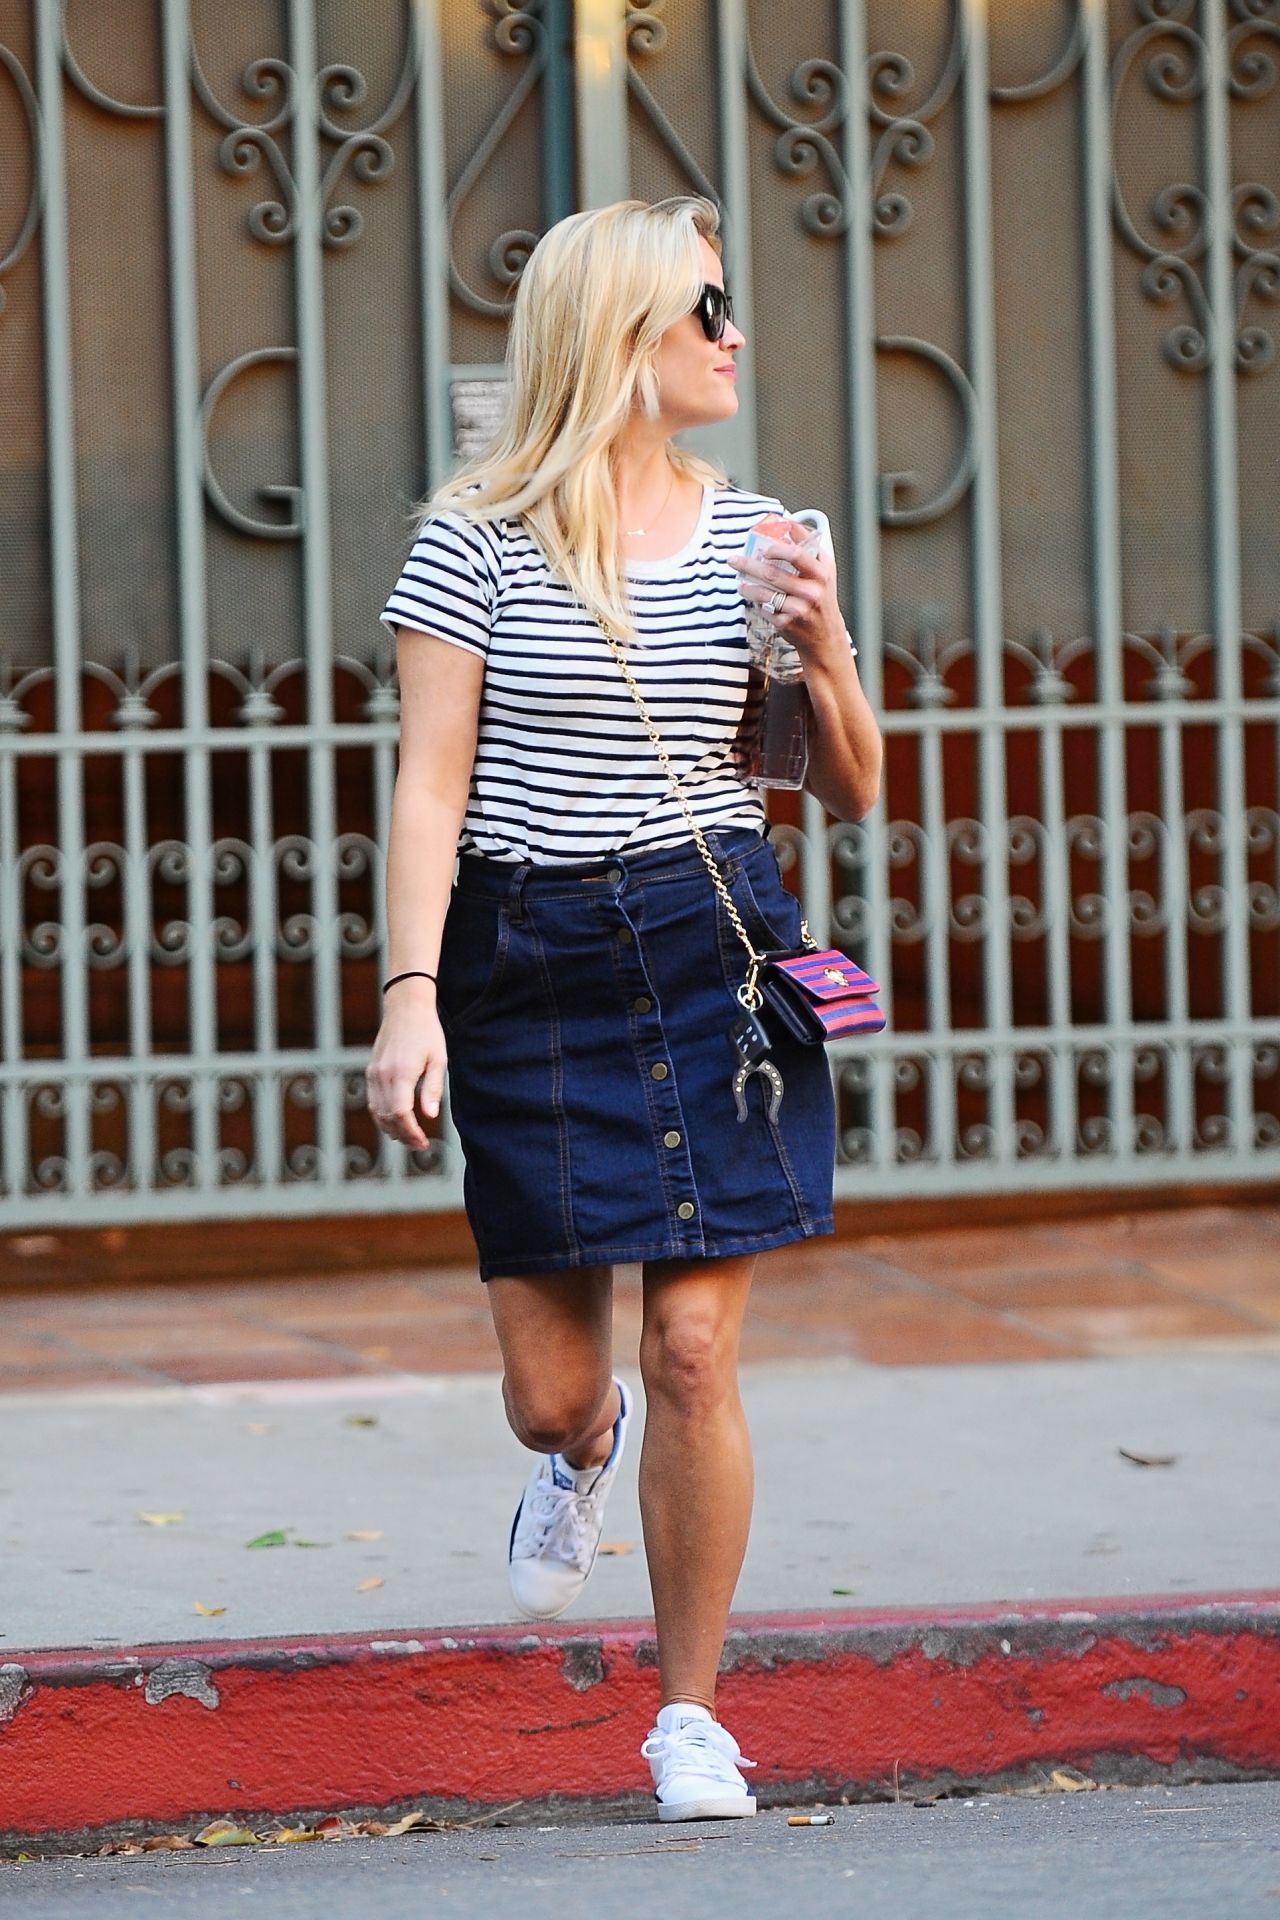 Reese Witherspoon Santa Monica October 20, 2018 – Star Style